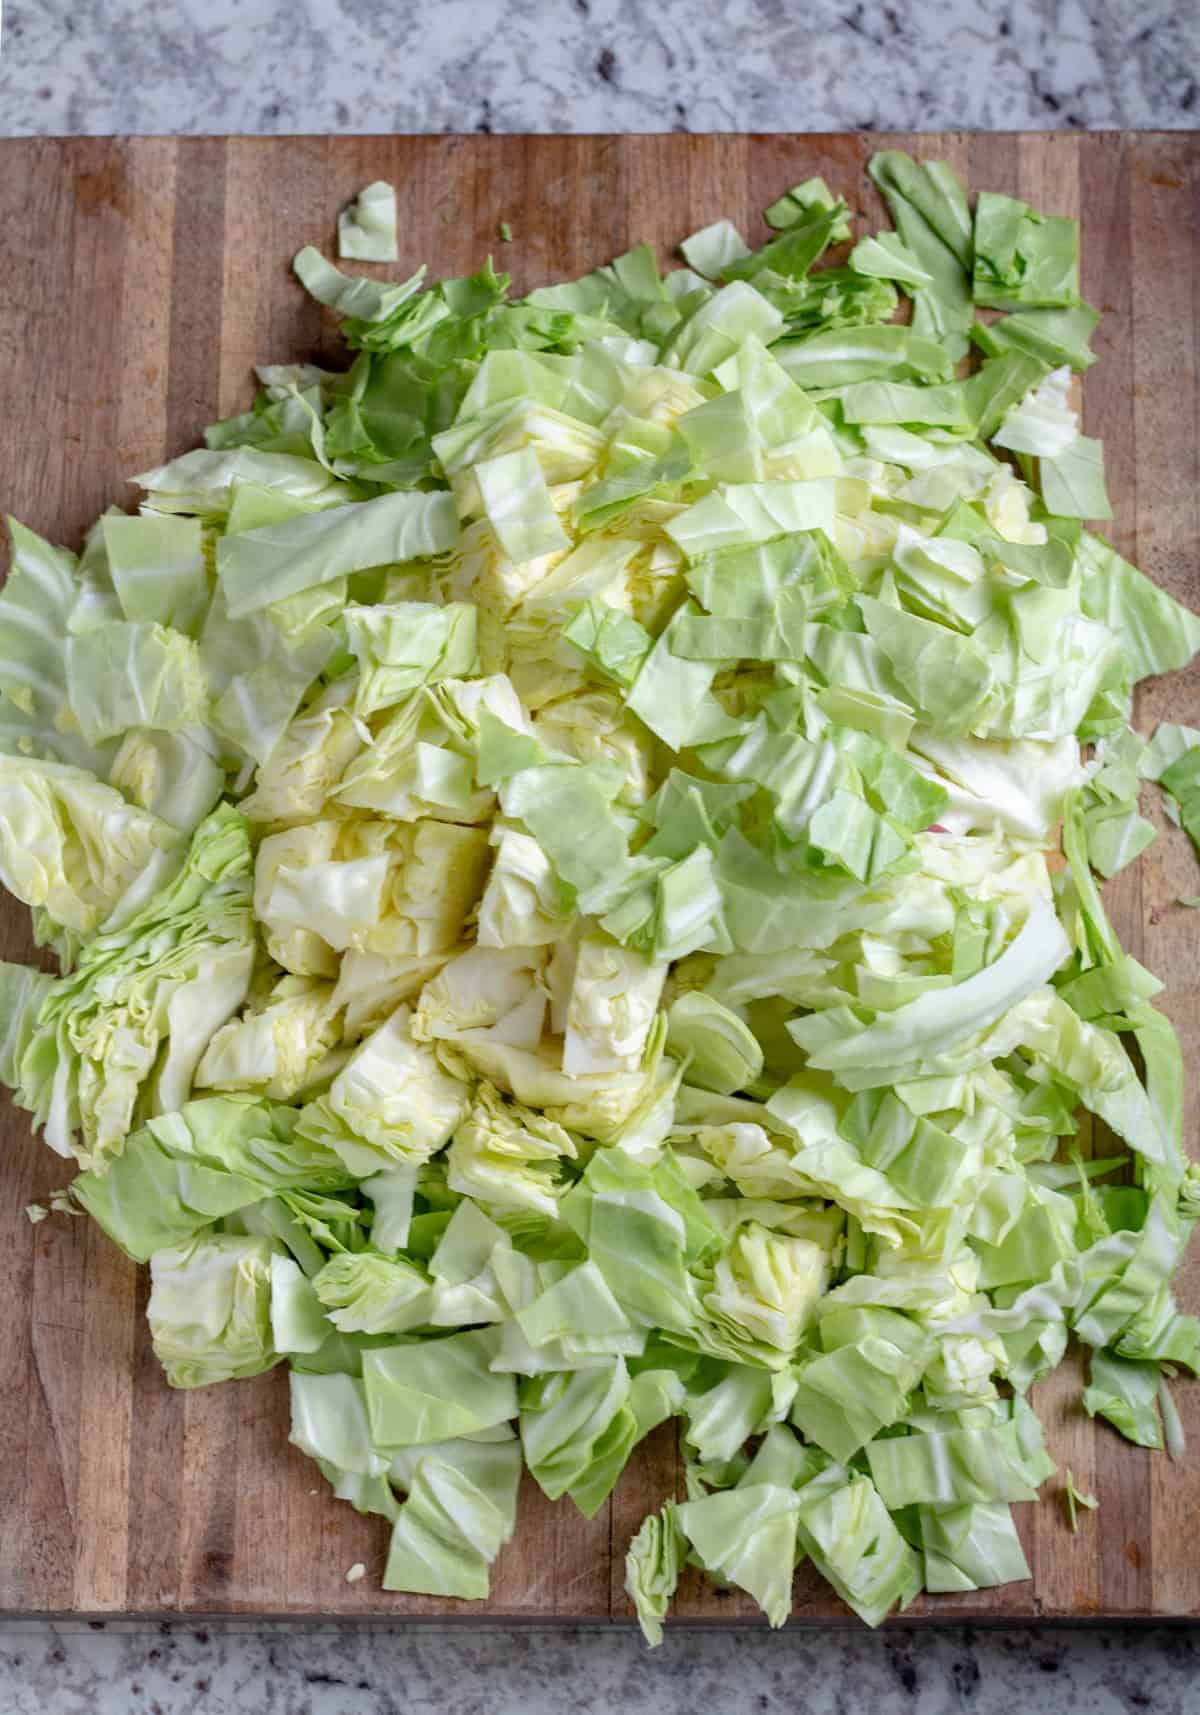 chopped cabbage on wooden cutting board